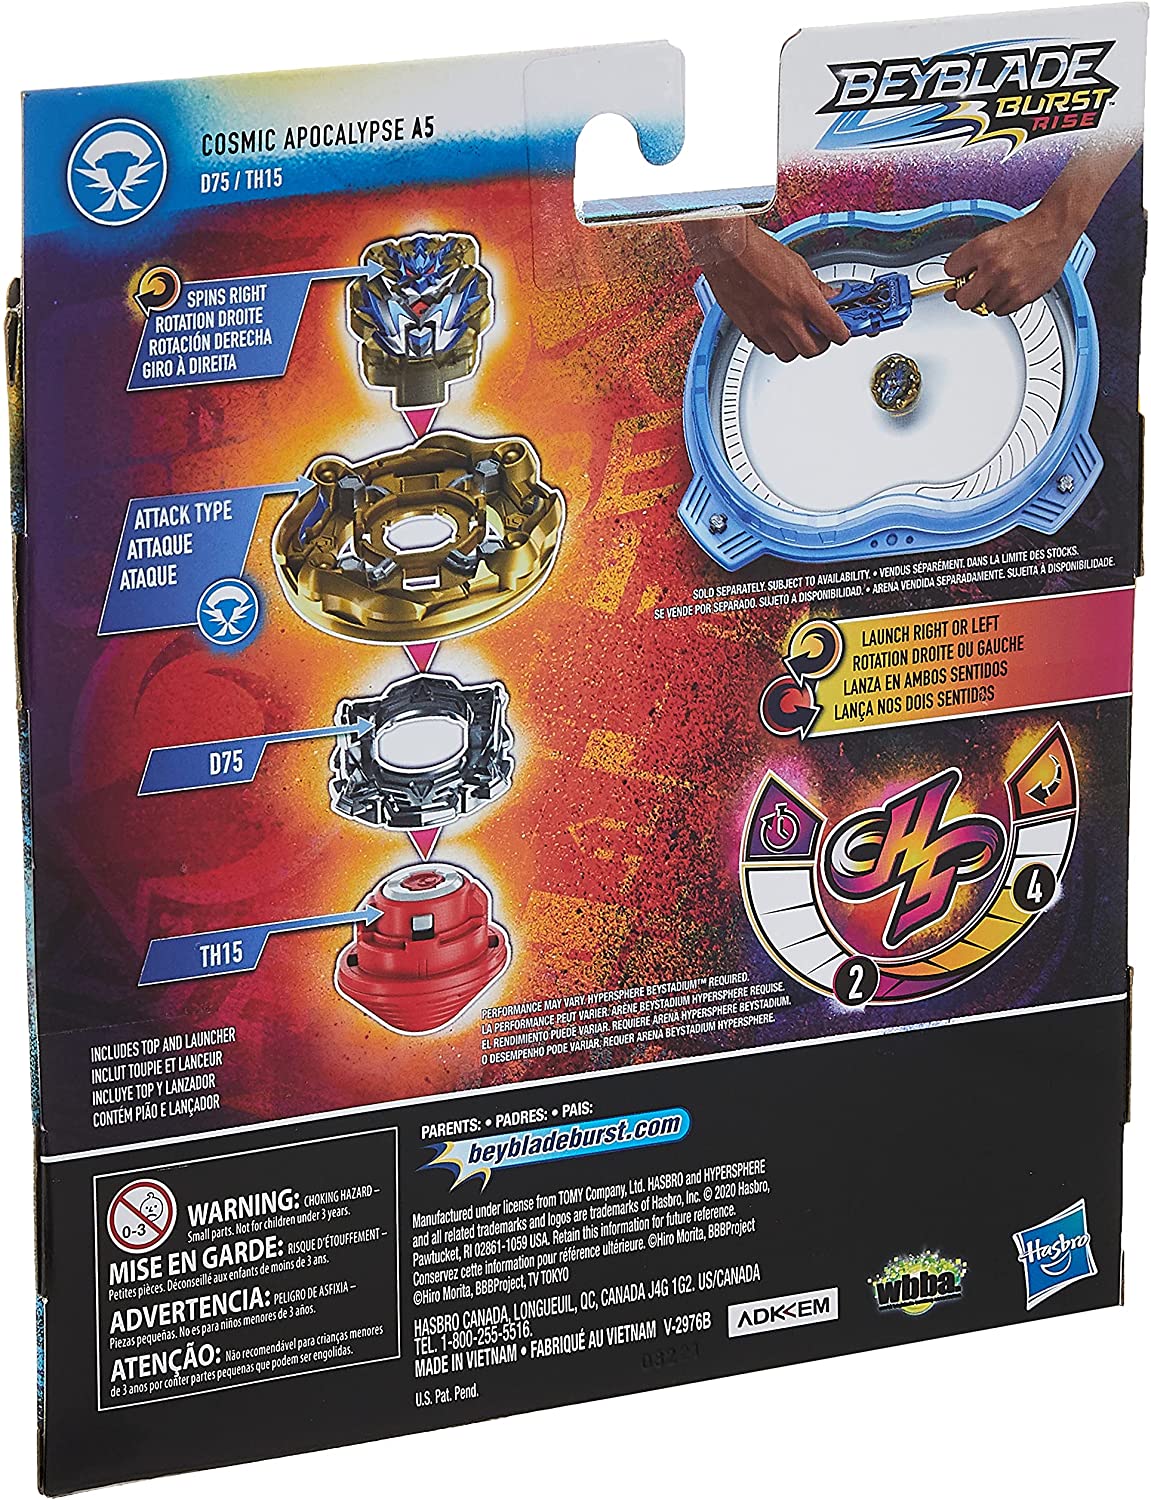 Beyblades: The Craze, History, and Enduring Sport of Spinning Tops – Vapor95